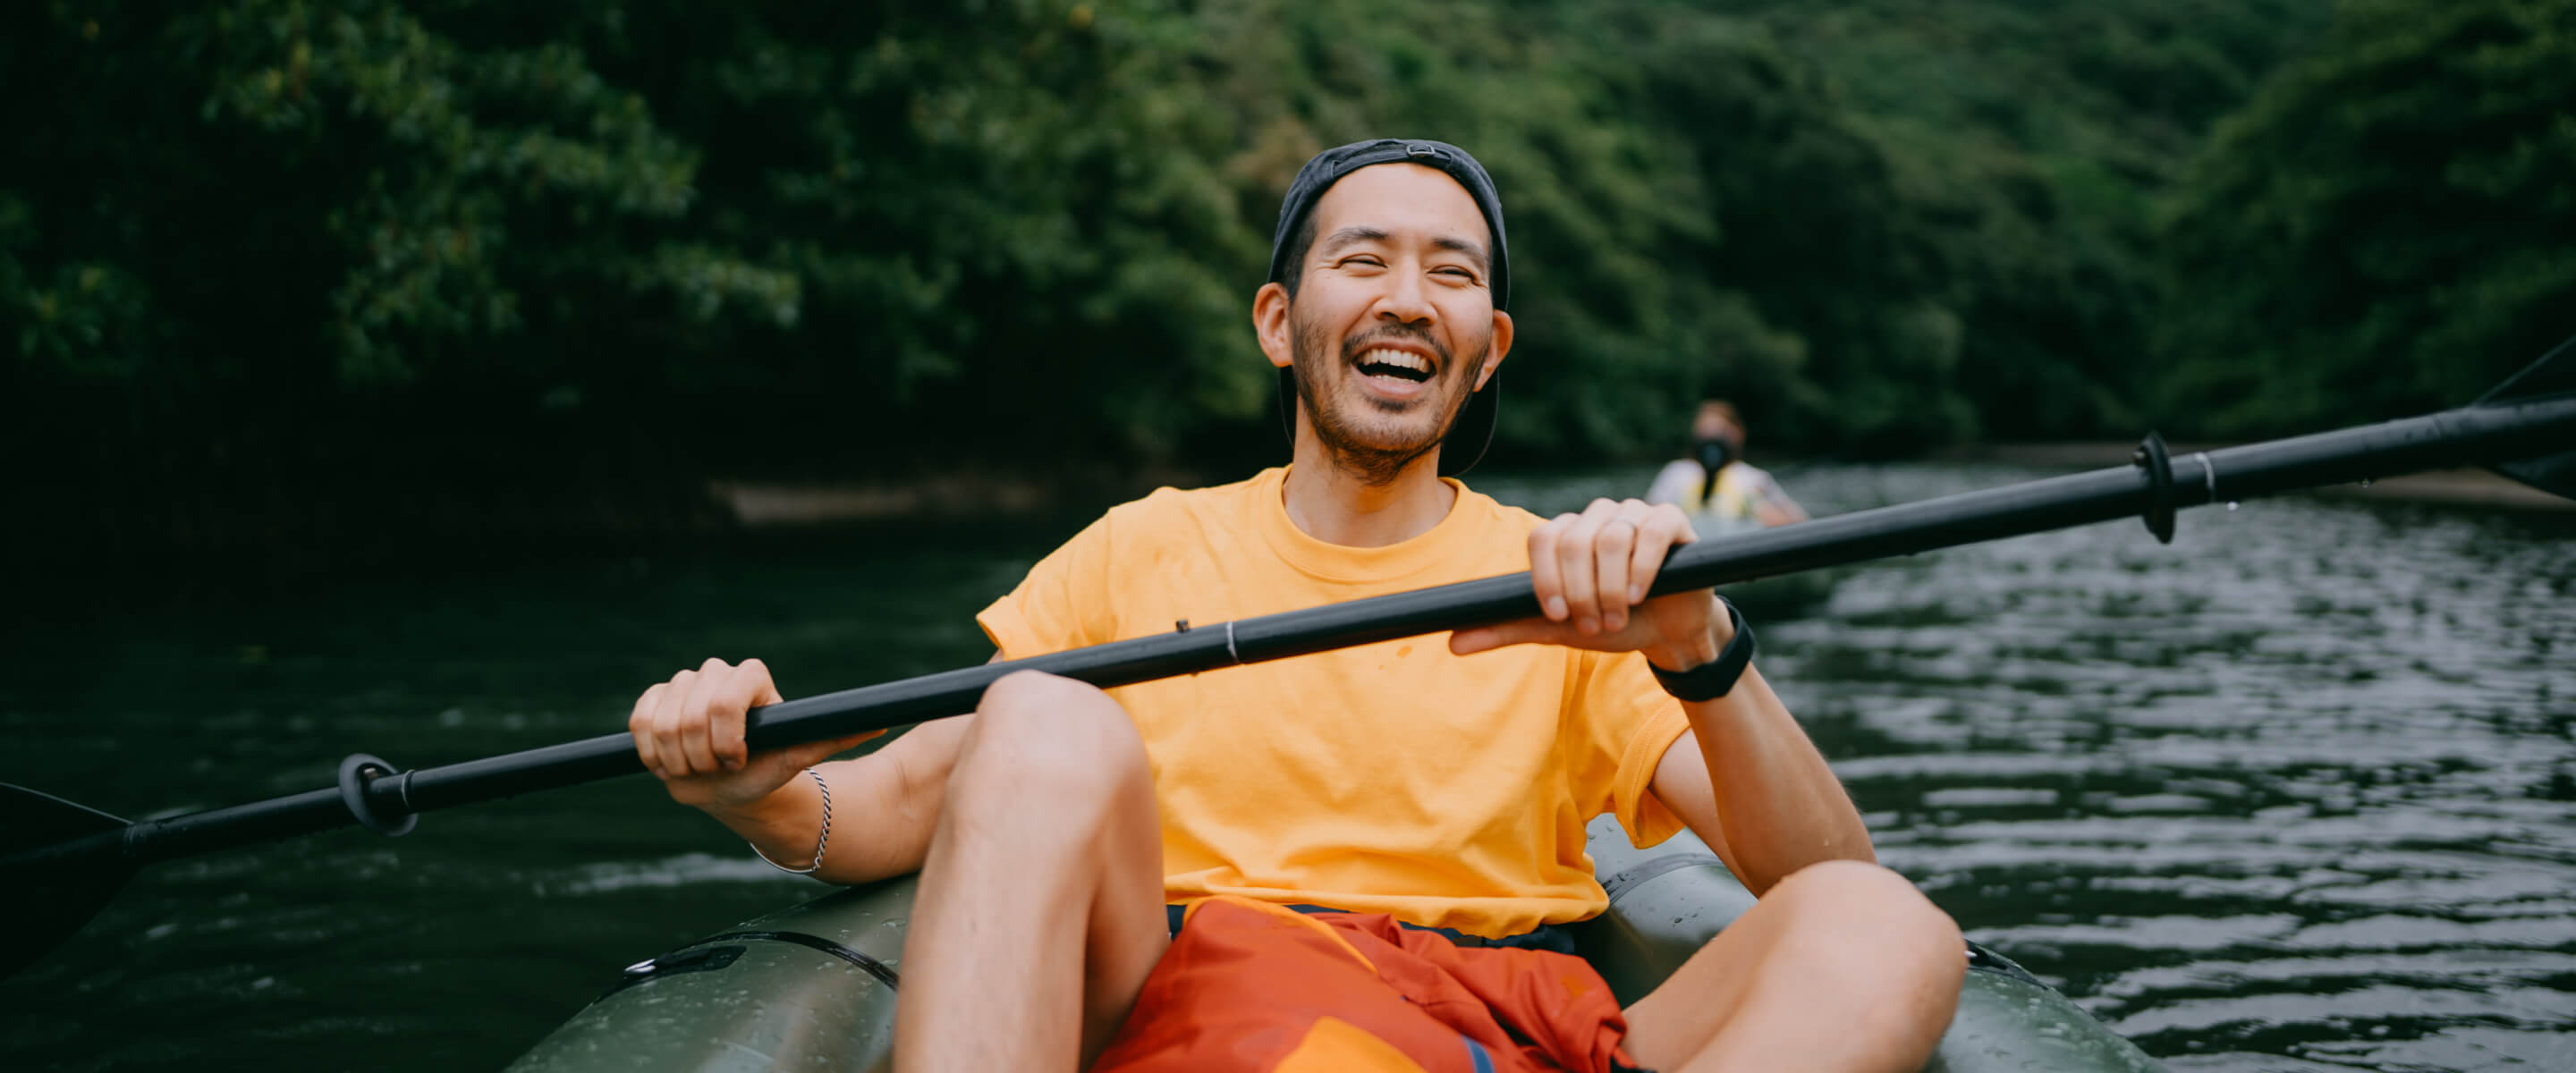 A man wearing an orange t-shirt smiling on a kayak holding a paddle on water